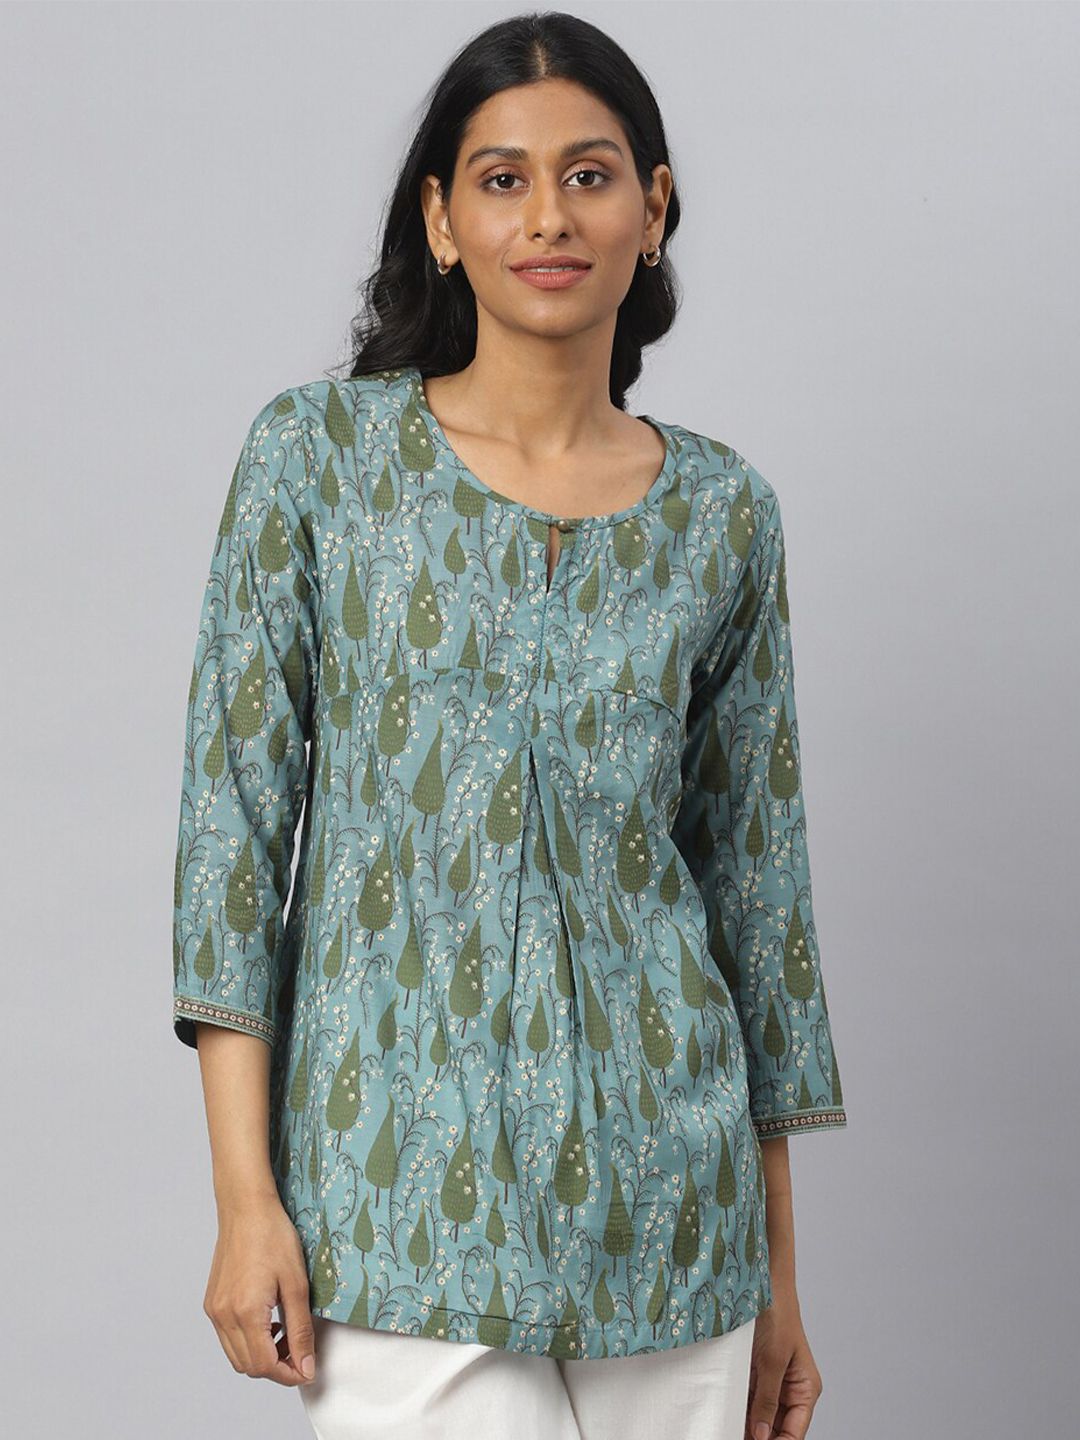 Fabindia Printed Keyhole Neck Top Price in India